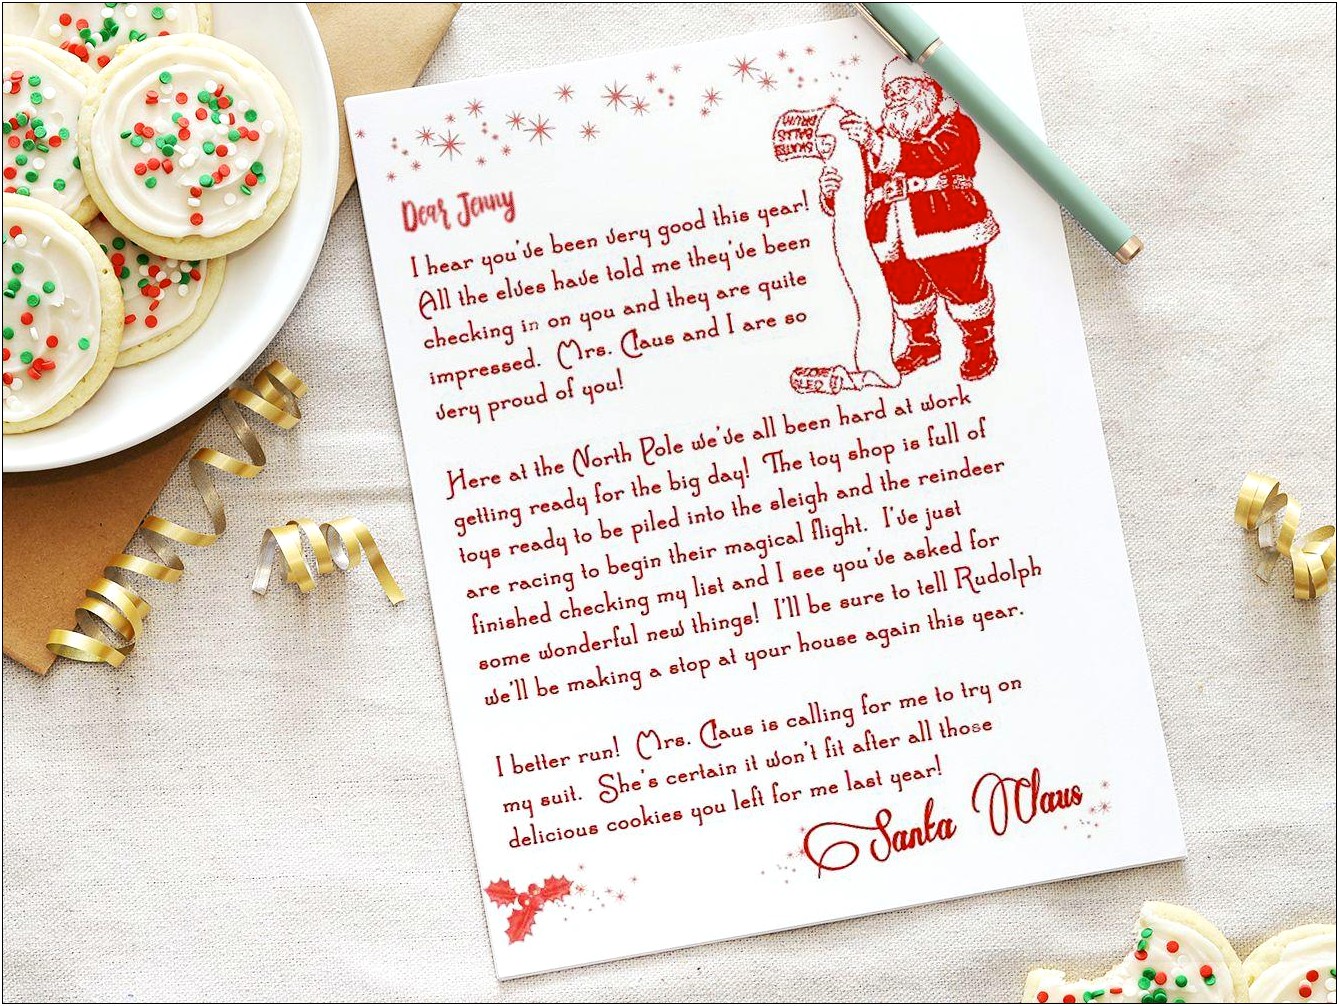 Free Envelope From Santa Claus Template